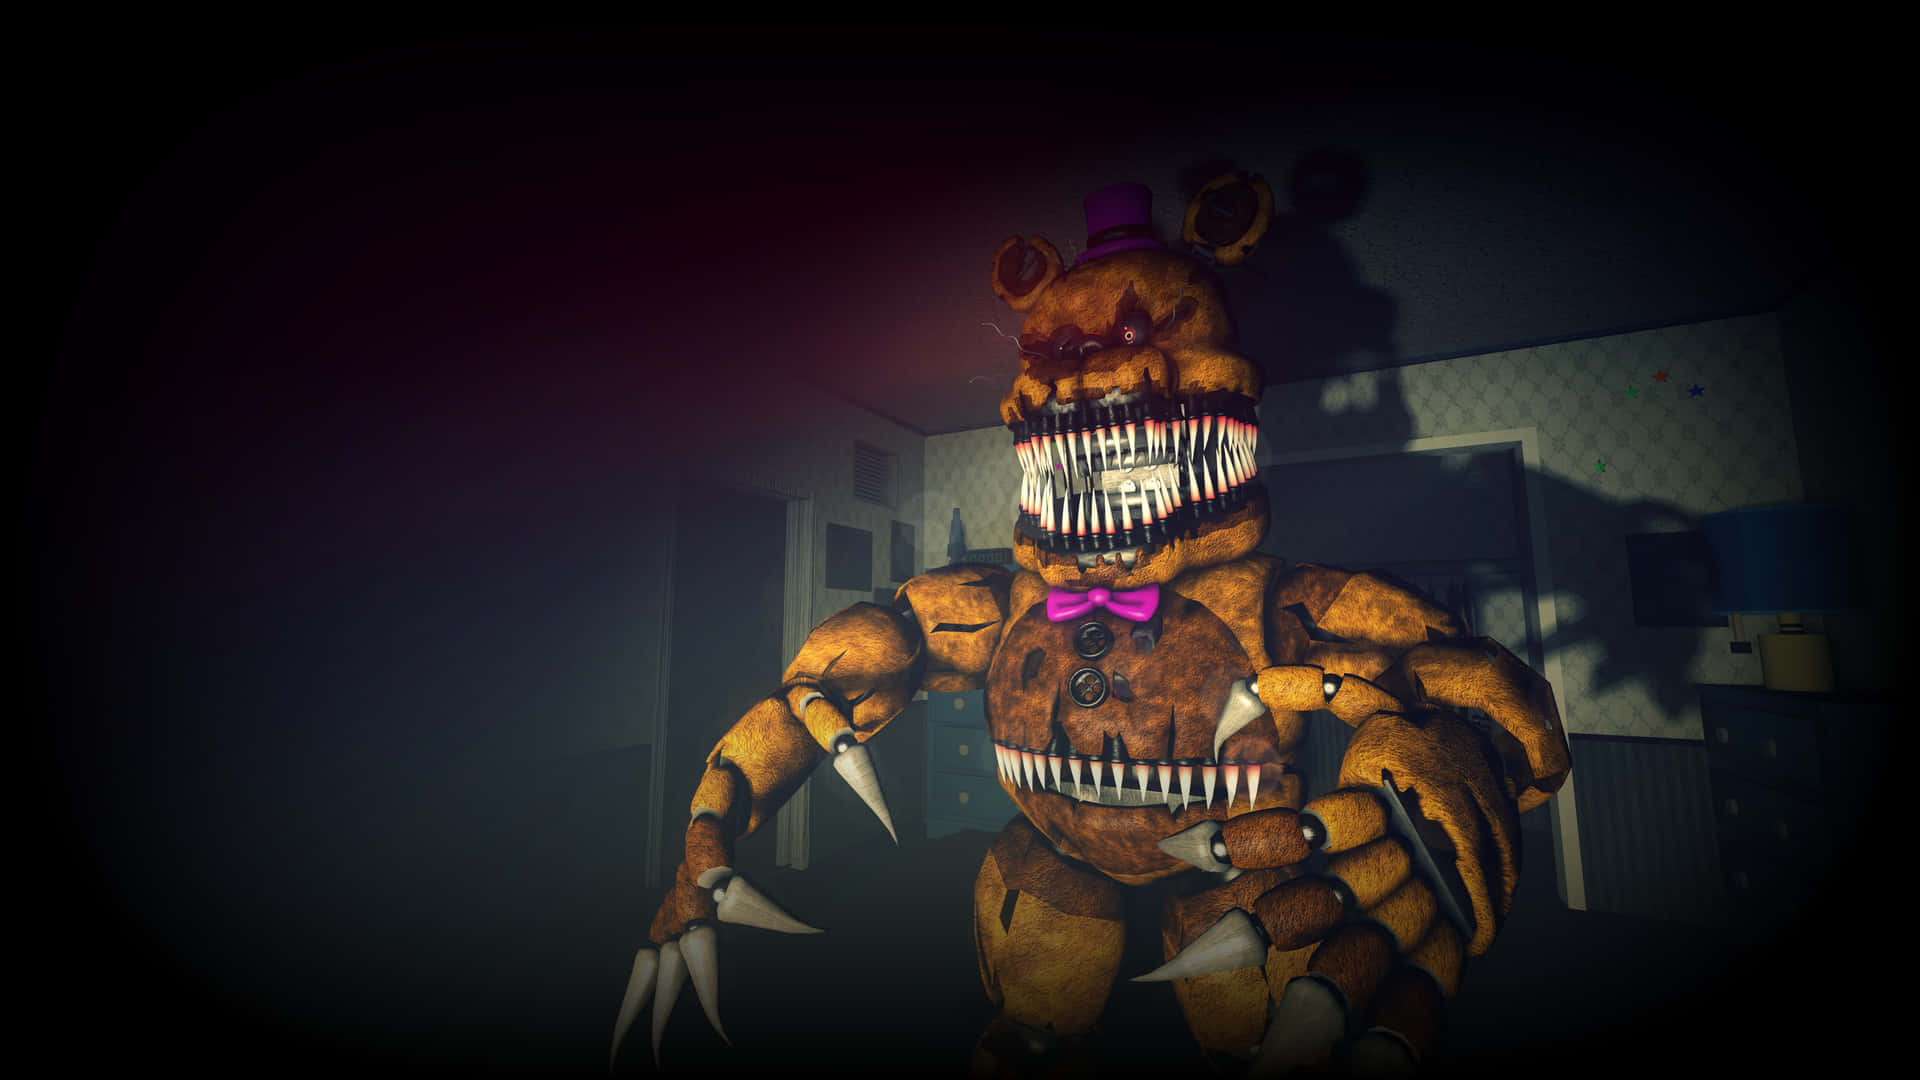 100+] Five Nights At Freddys 4 Wallpapers